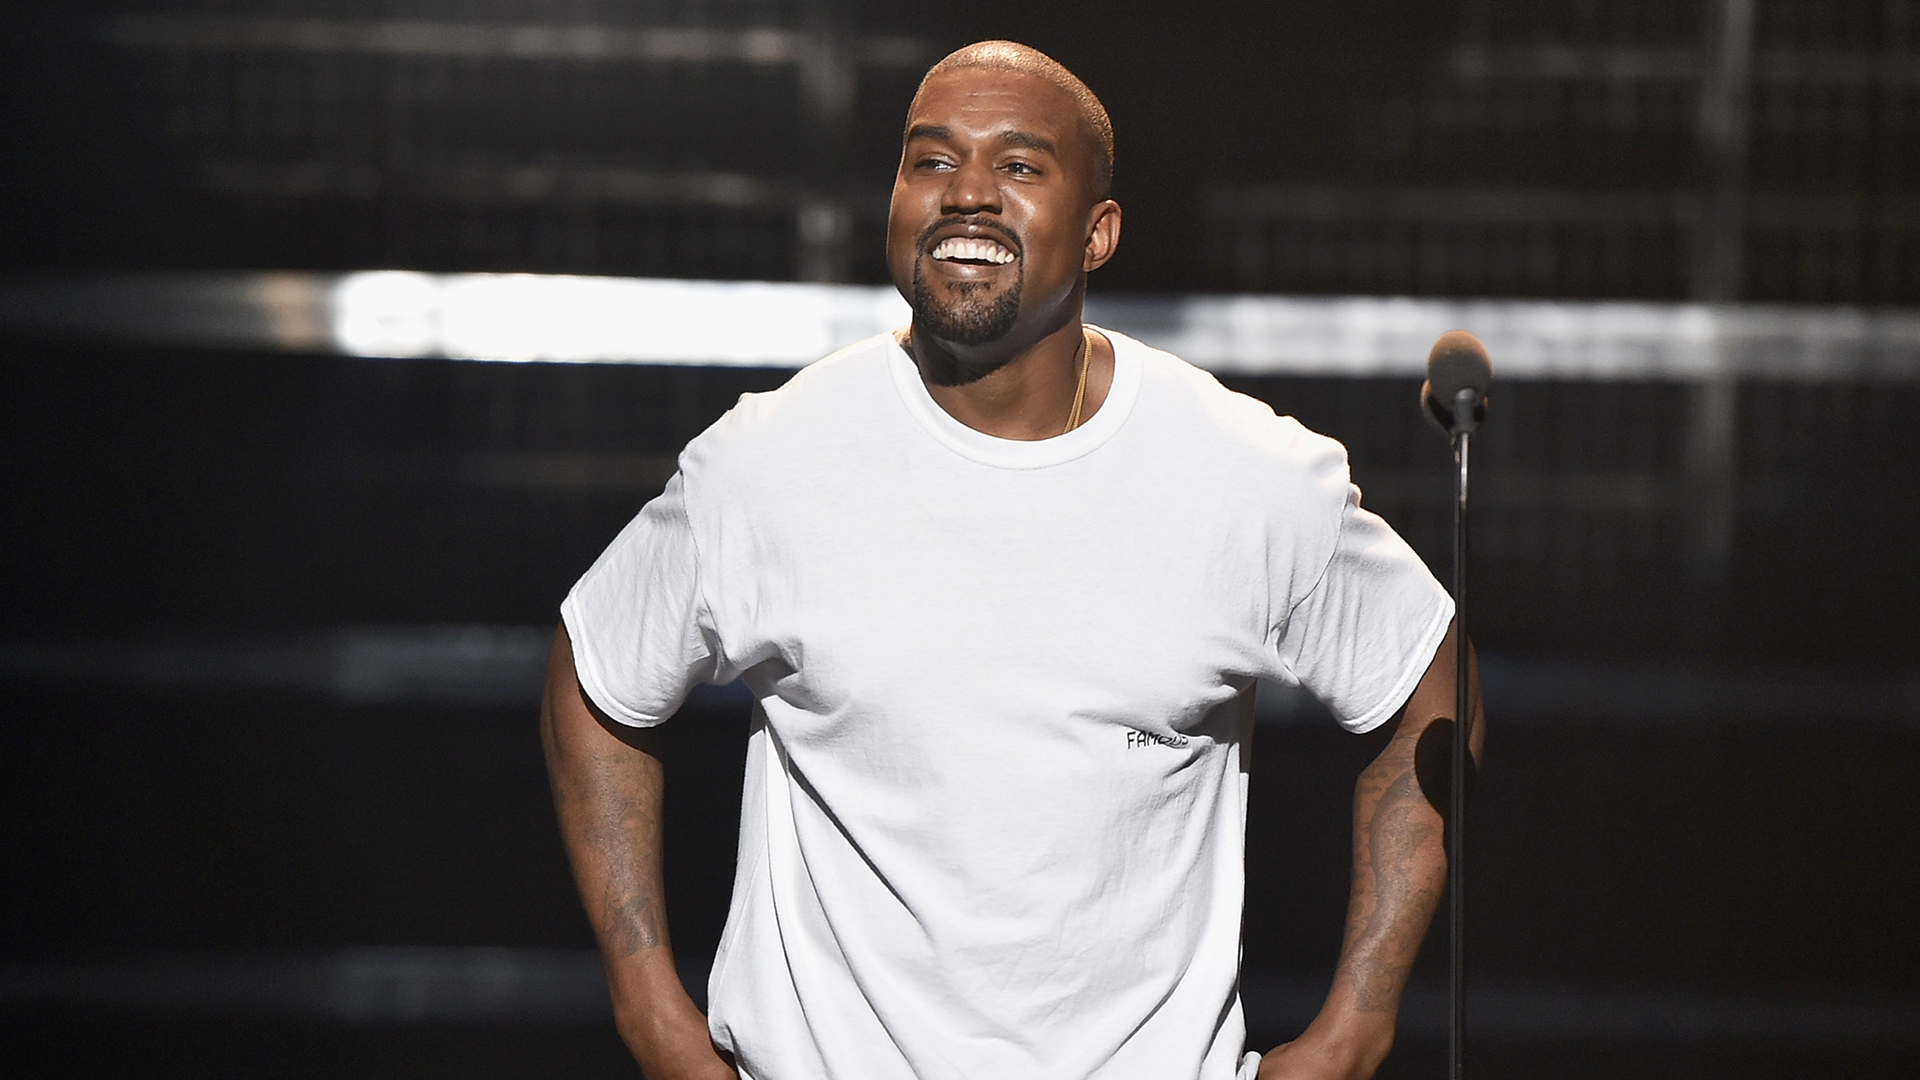 Kanye West Claims He's Worth $10B — But What's His Real Net Worth?